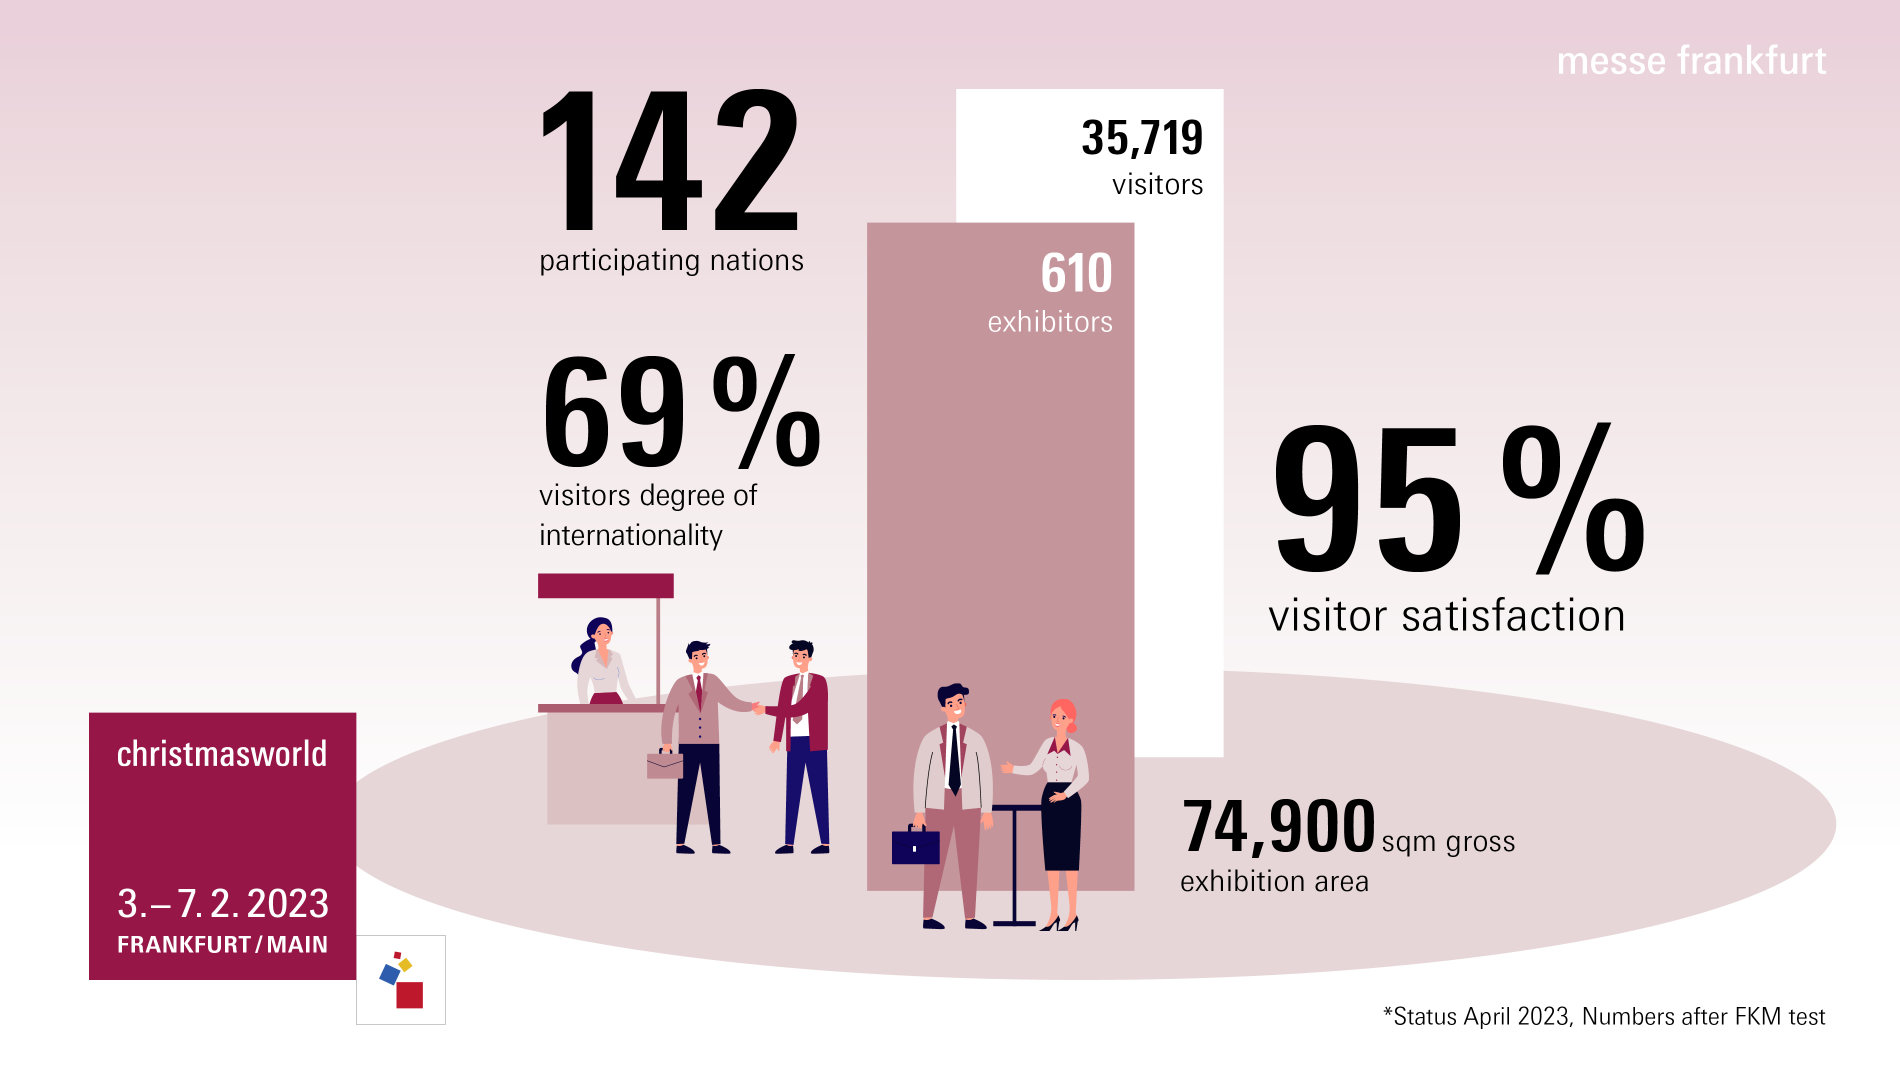 number of exhibitors and visitors of Christmasworld 2023